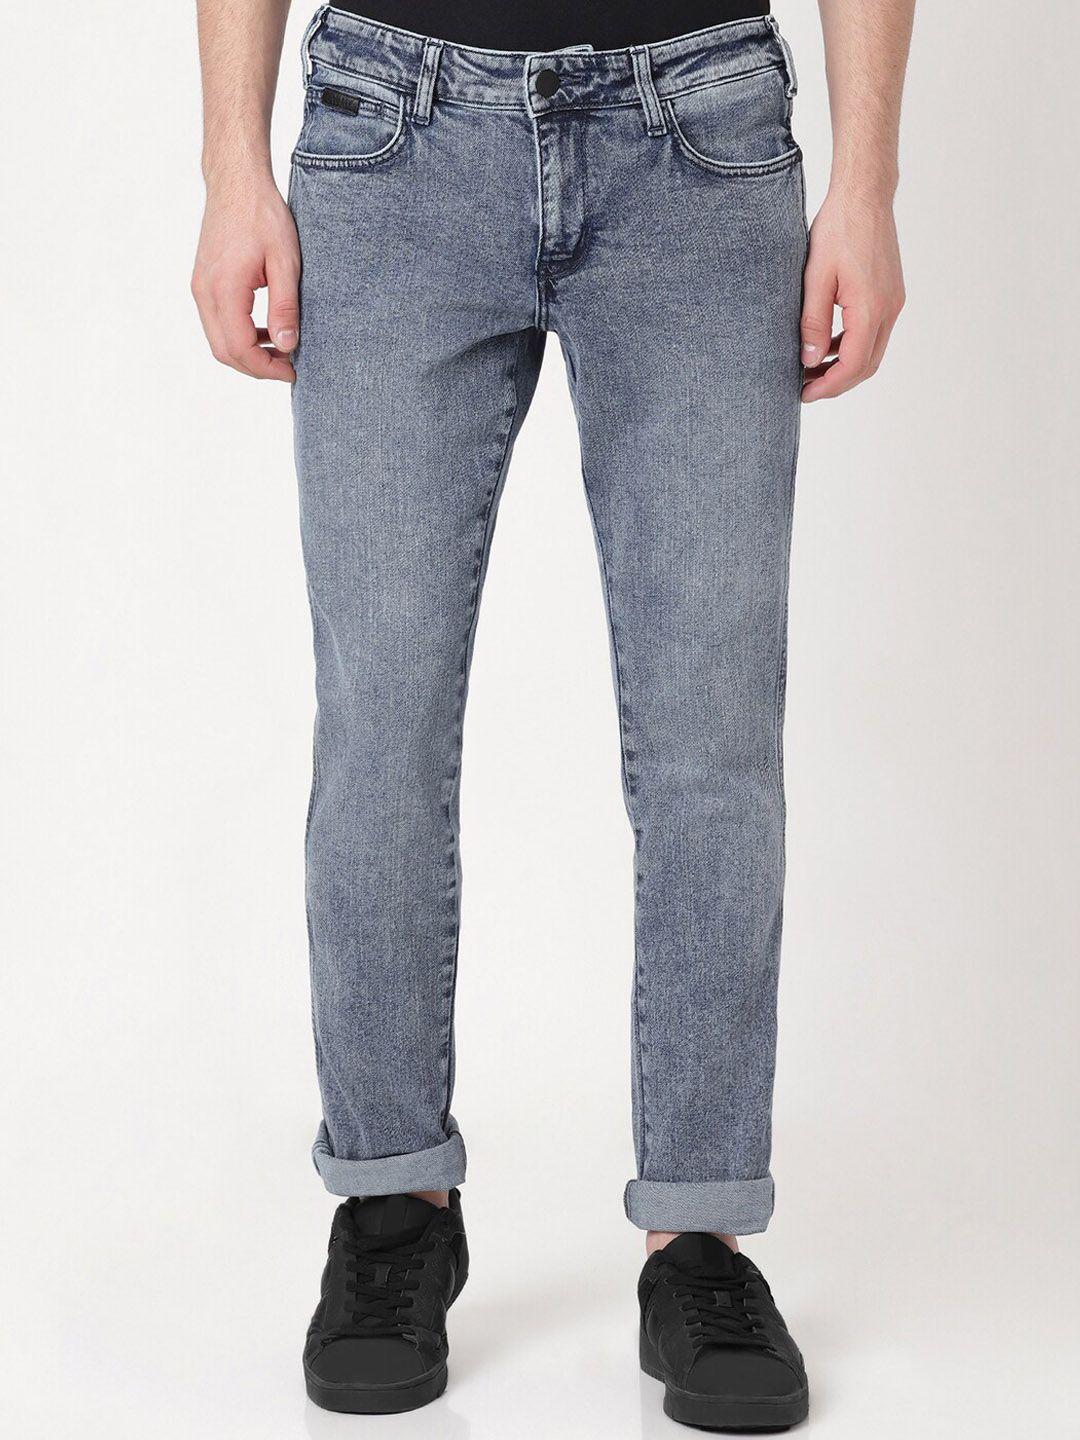 wrangler-men-skanders-slim-fit-low-rise-heavy-fade-stretchable-jeans